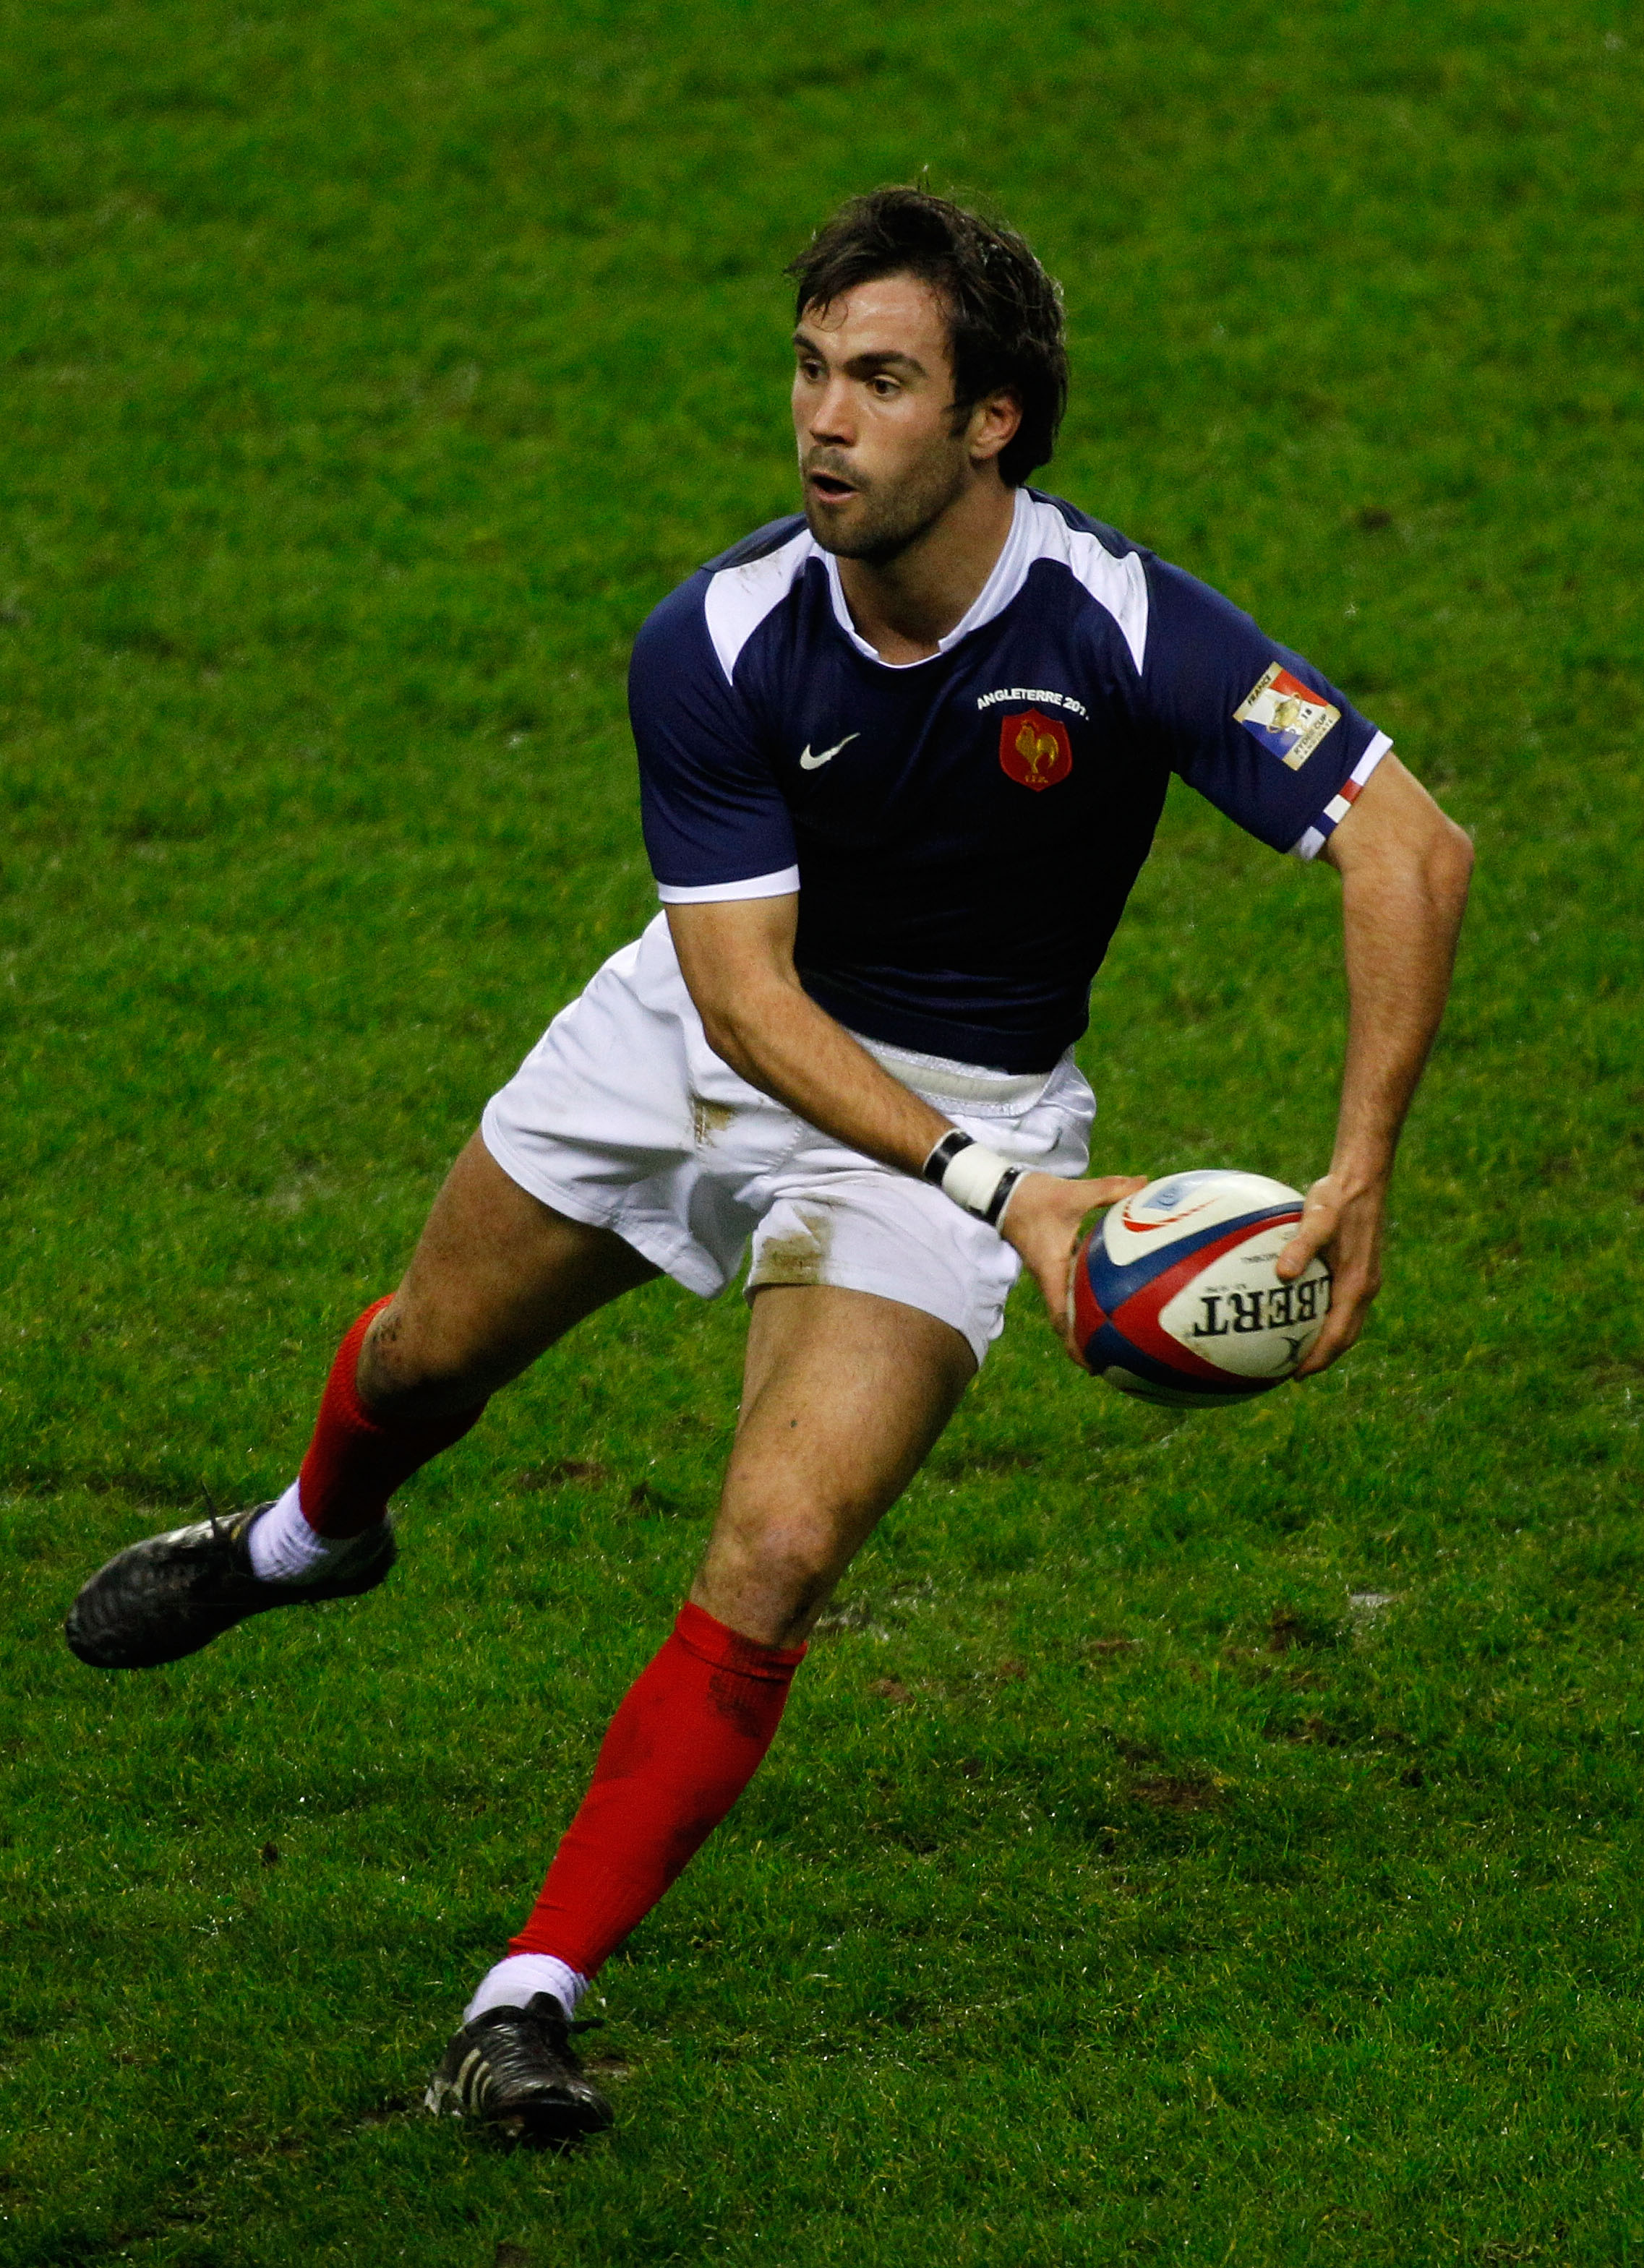 LONDON, ENGLAND - FEBRUARY 26:  France player Morgan Parra in action during the RBS Six Nations Championship match between England and France at Twickenham Stadium on February 26, 2011 in London, England.  (Photo by Stu Forster/Getty Images)